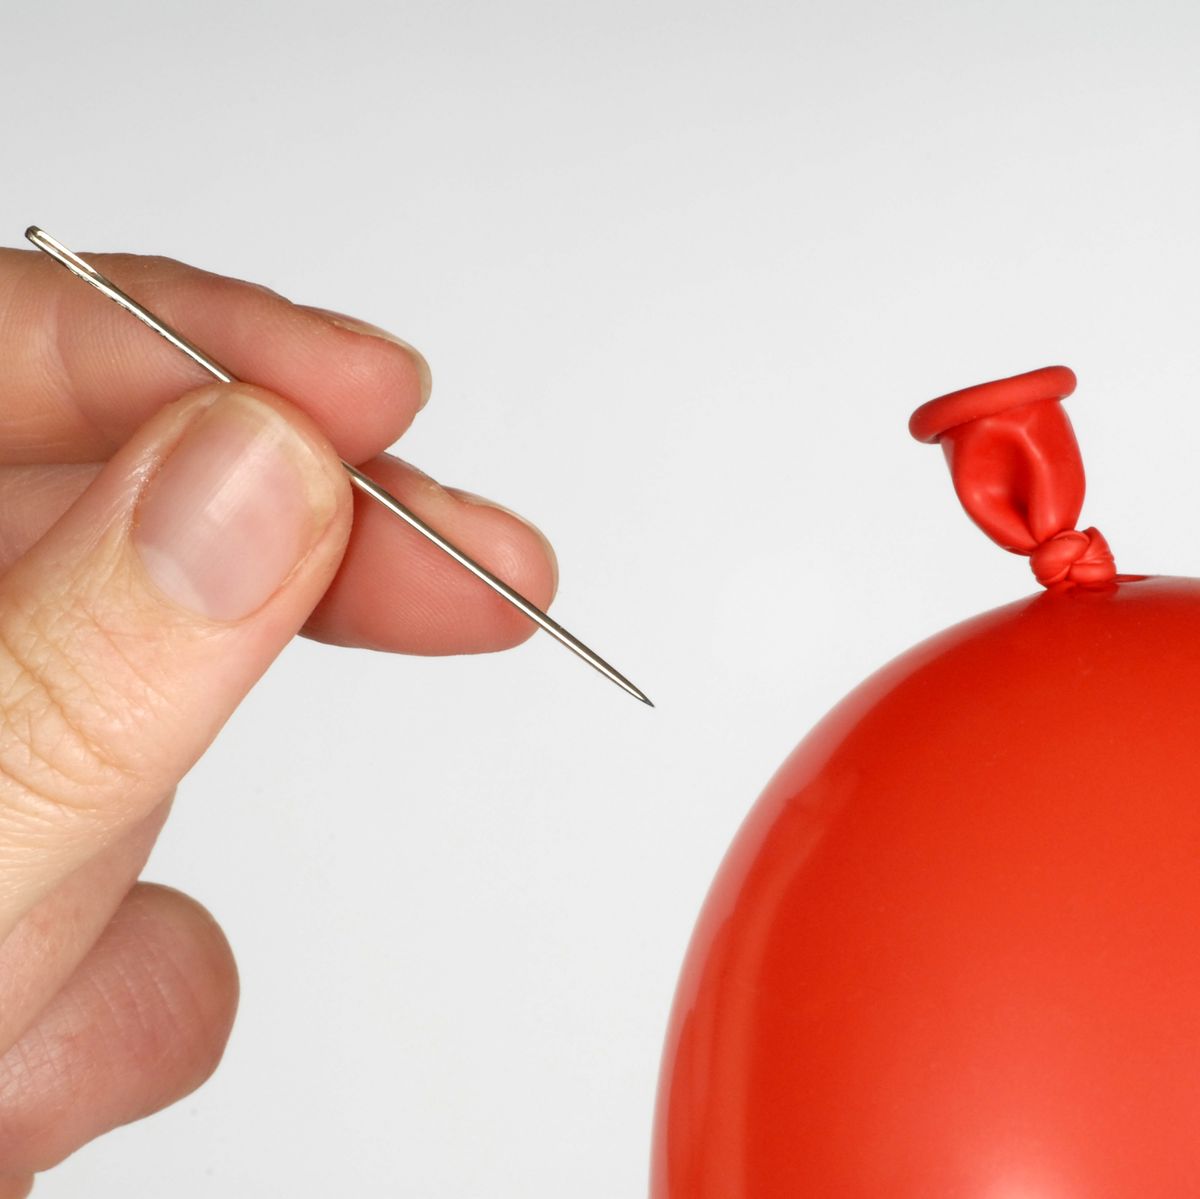 Hand holding a needle about to pop a red balloon